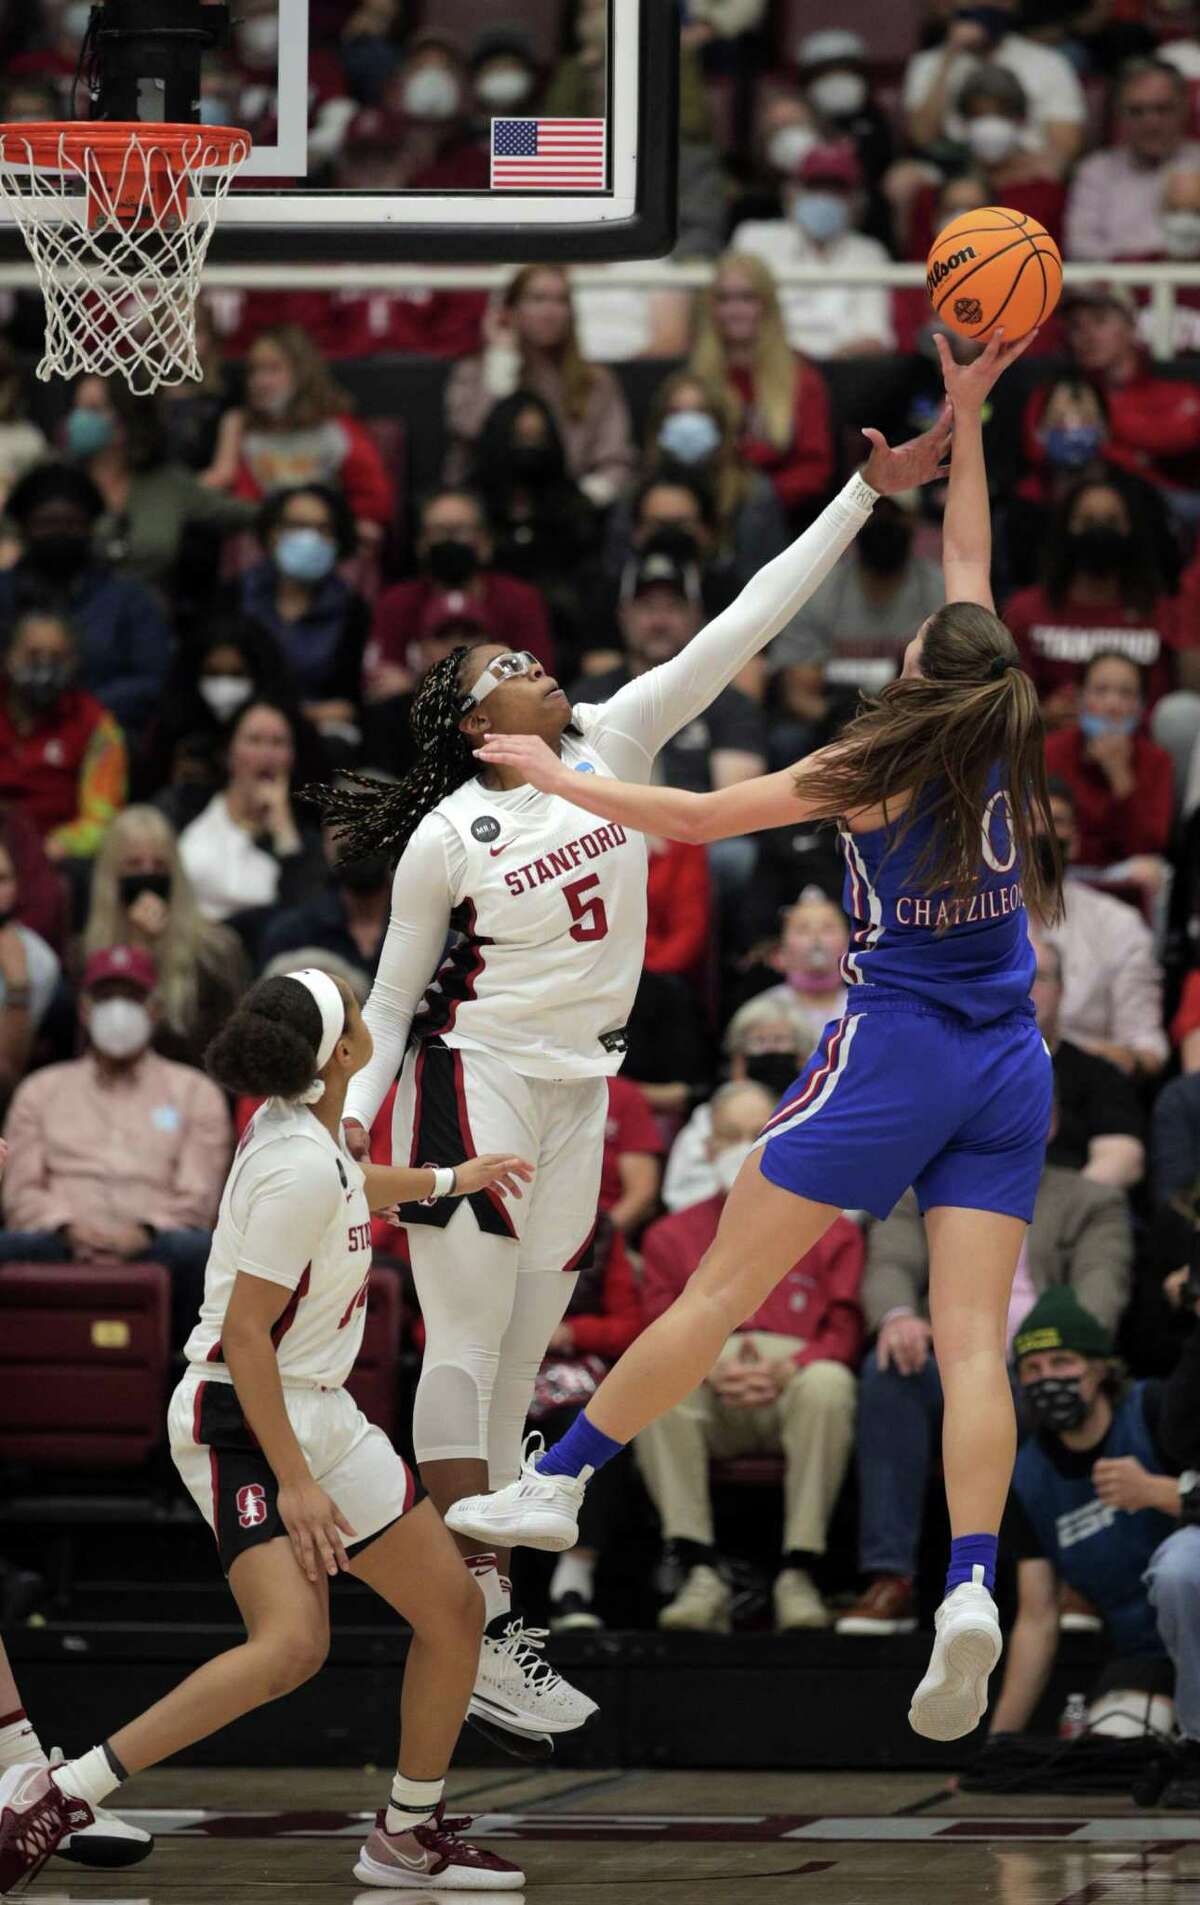 Francesca Belibi (5) tries to defend against Ioanna Chatzileonti (10) In the first half as the Stanford Cardinal played the Kansas Jayhawks at Maples Pavilion in round 2 of the NCAA Womens’ Tournament in Stanford, Calif., on Sunday, March 20, 2022.